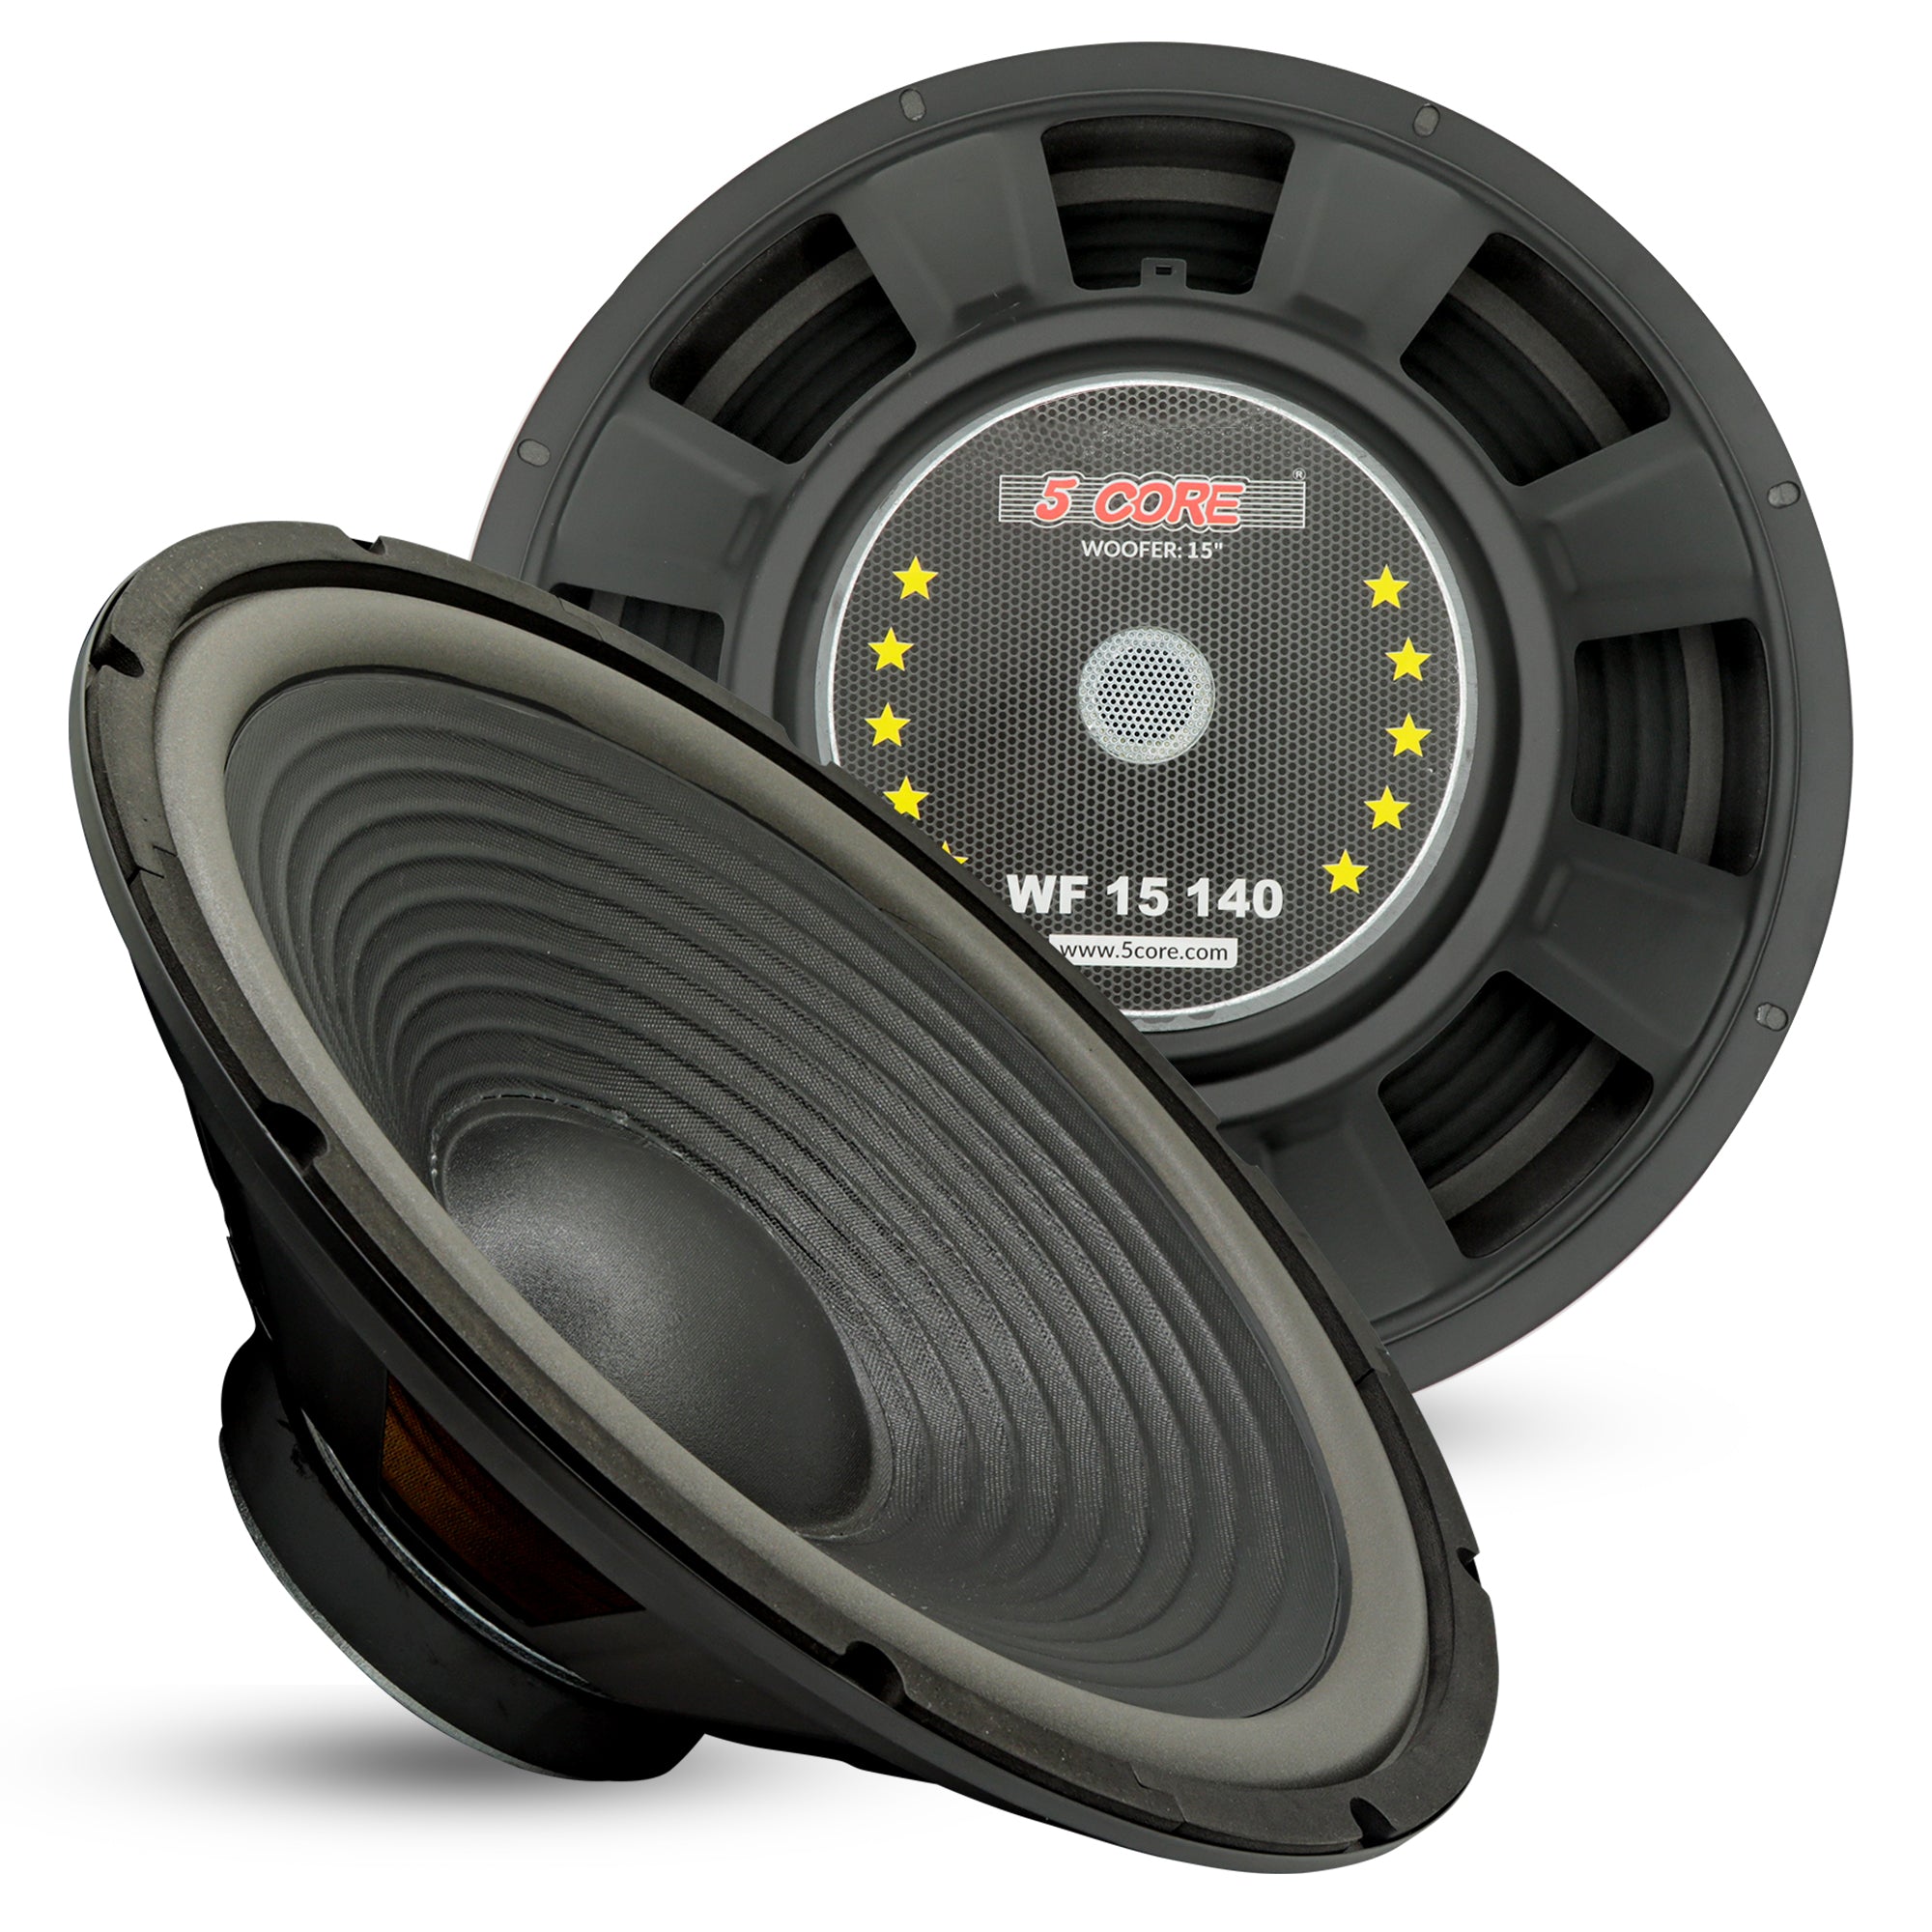 Powerful 15-inch subwoofer speaker designed for car audio systems.